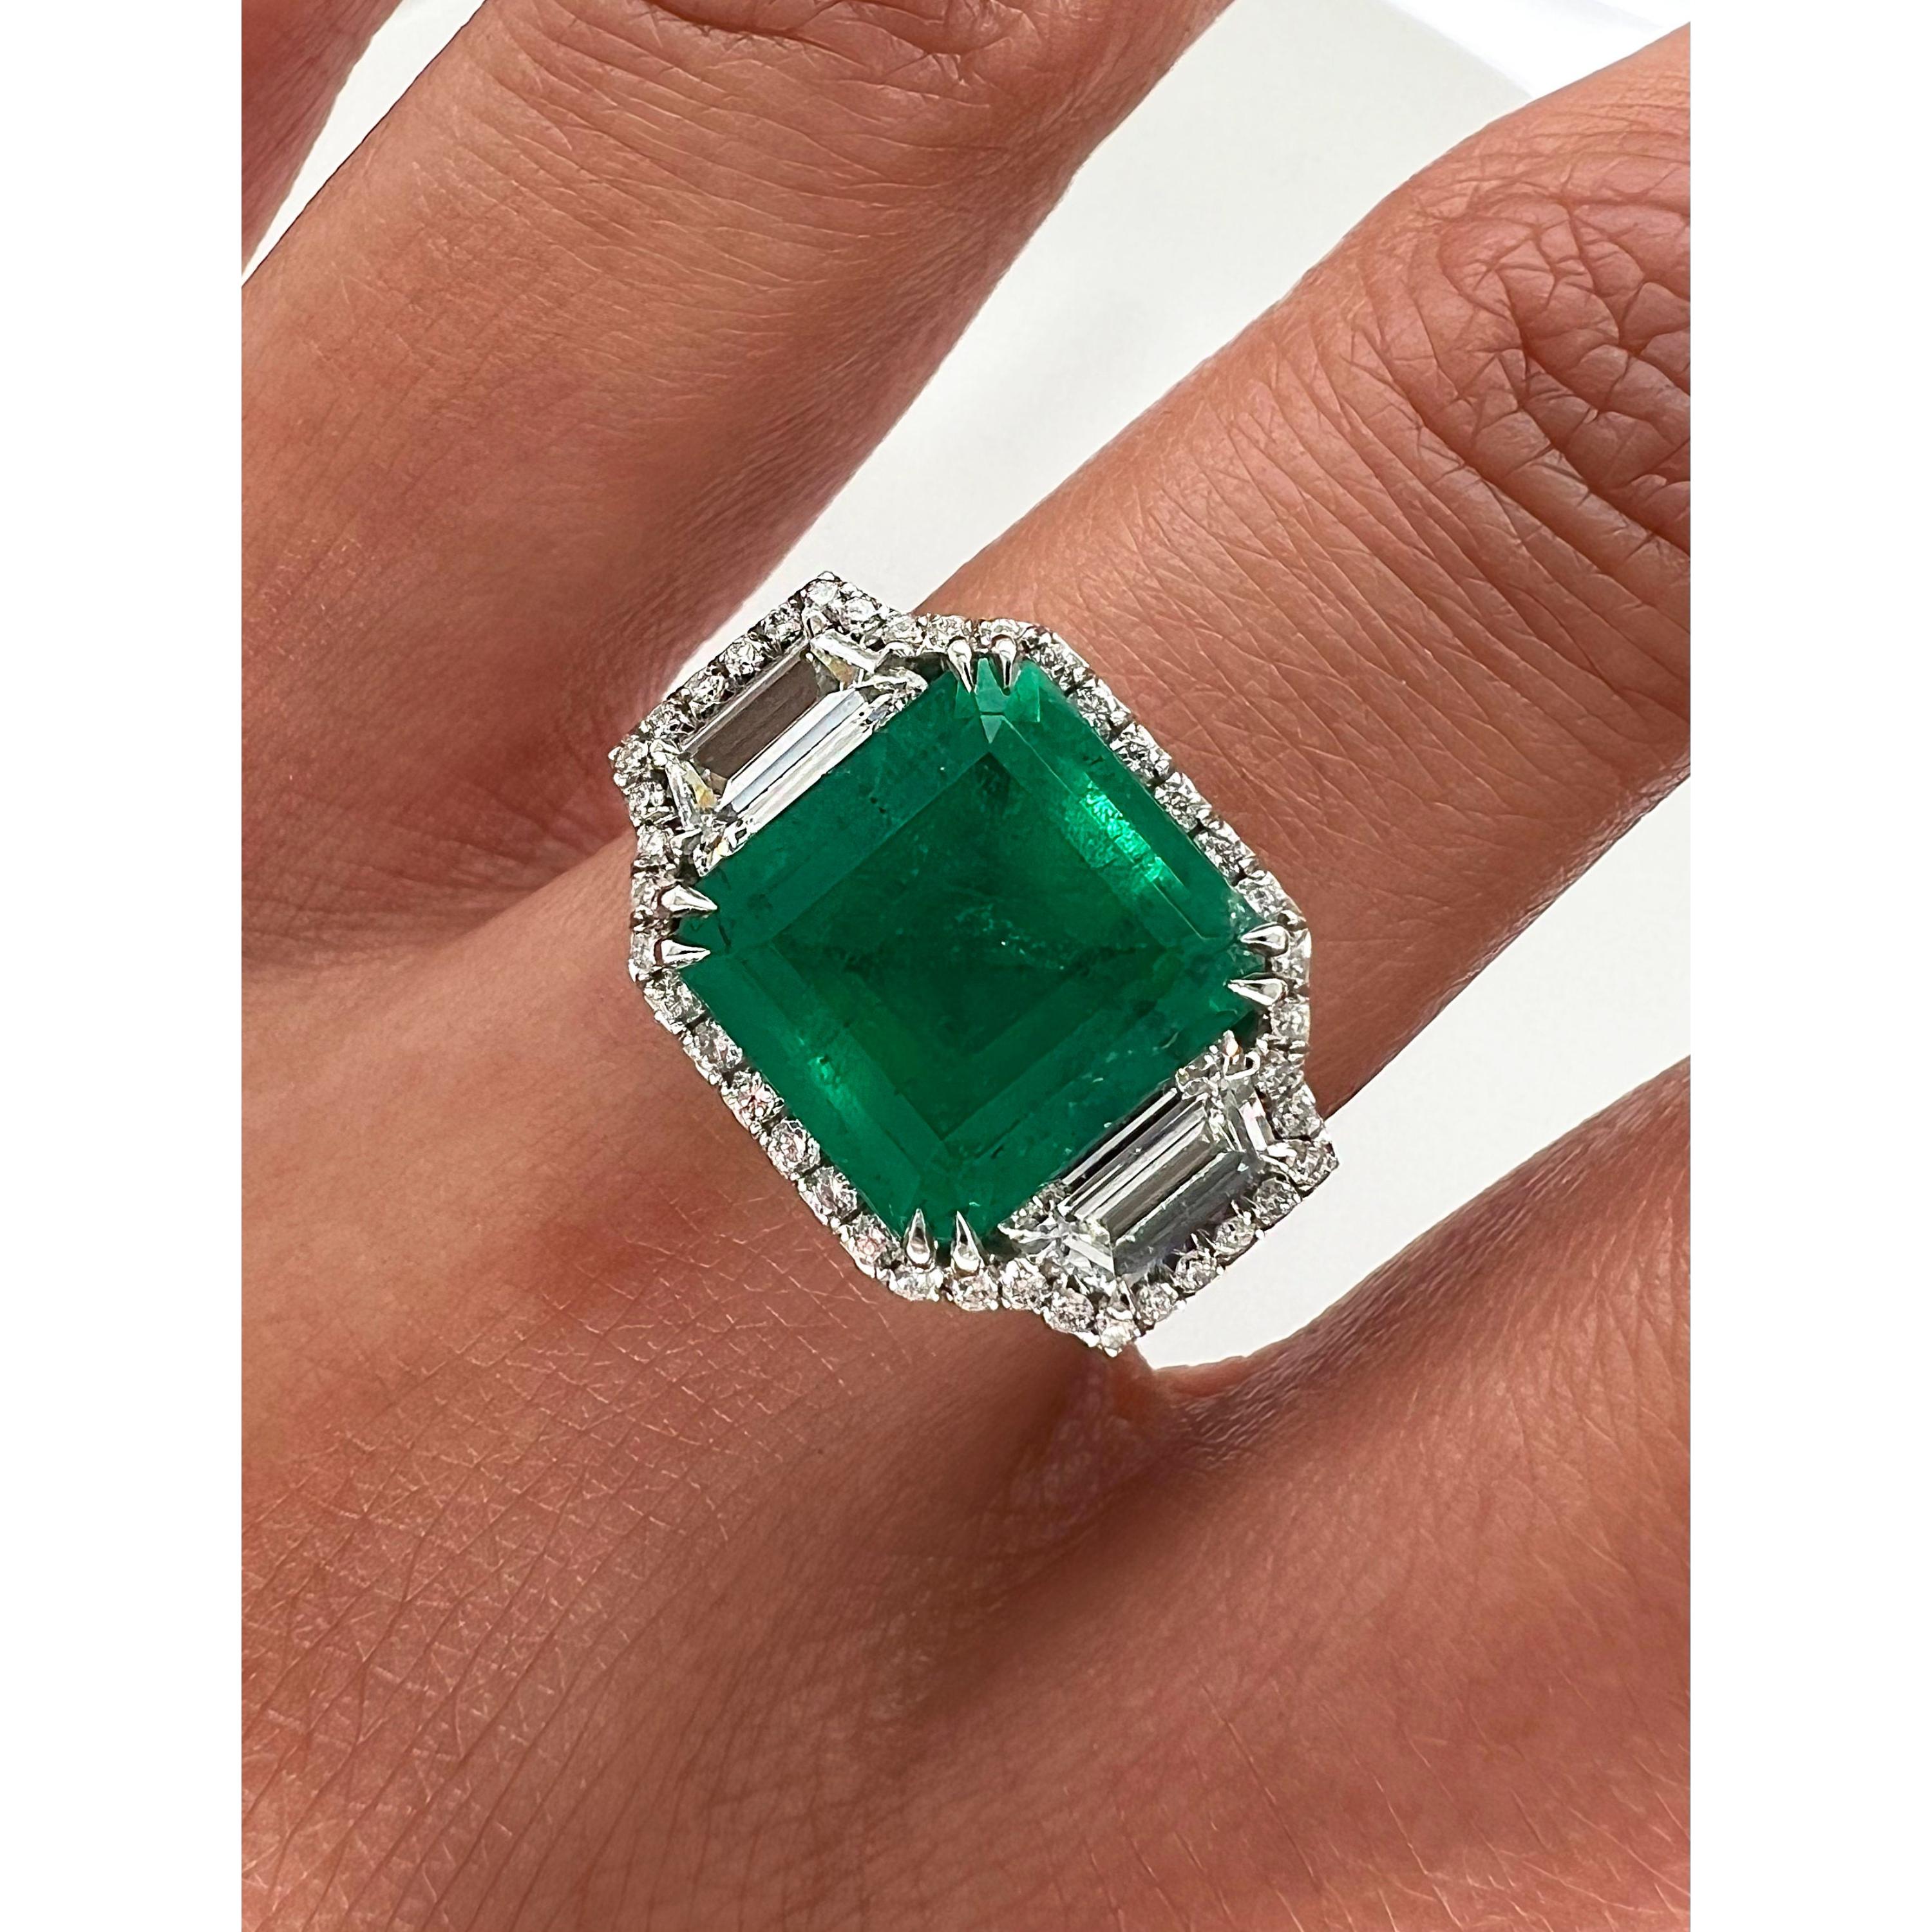 Emerald Cut Certified 3.91 Carat Natural Emerald Diamond Cocktail Ring Unique Diamond Ring For Sale